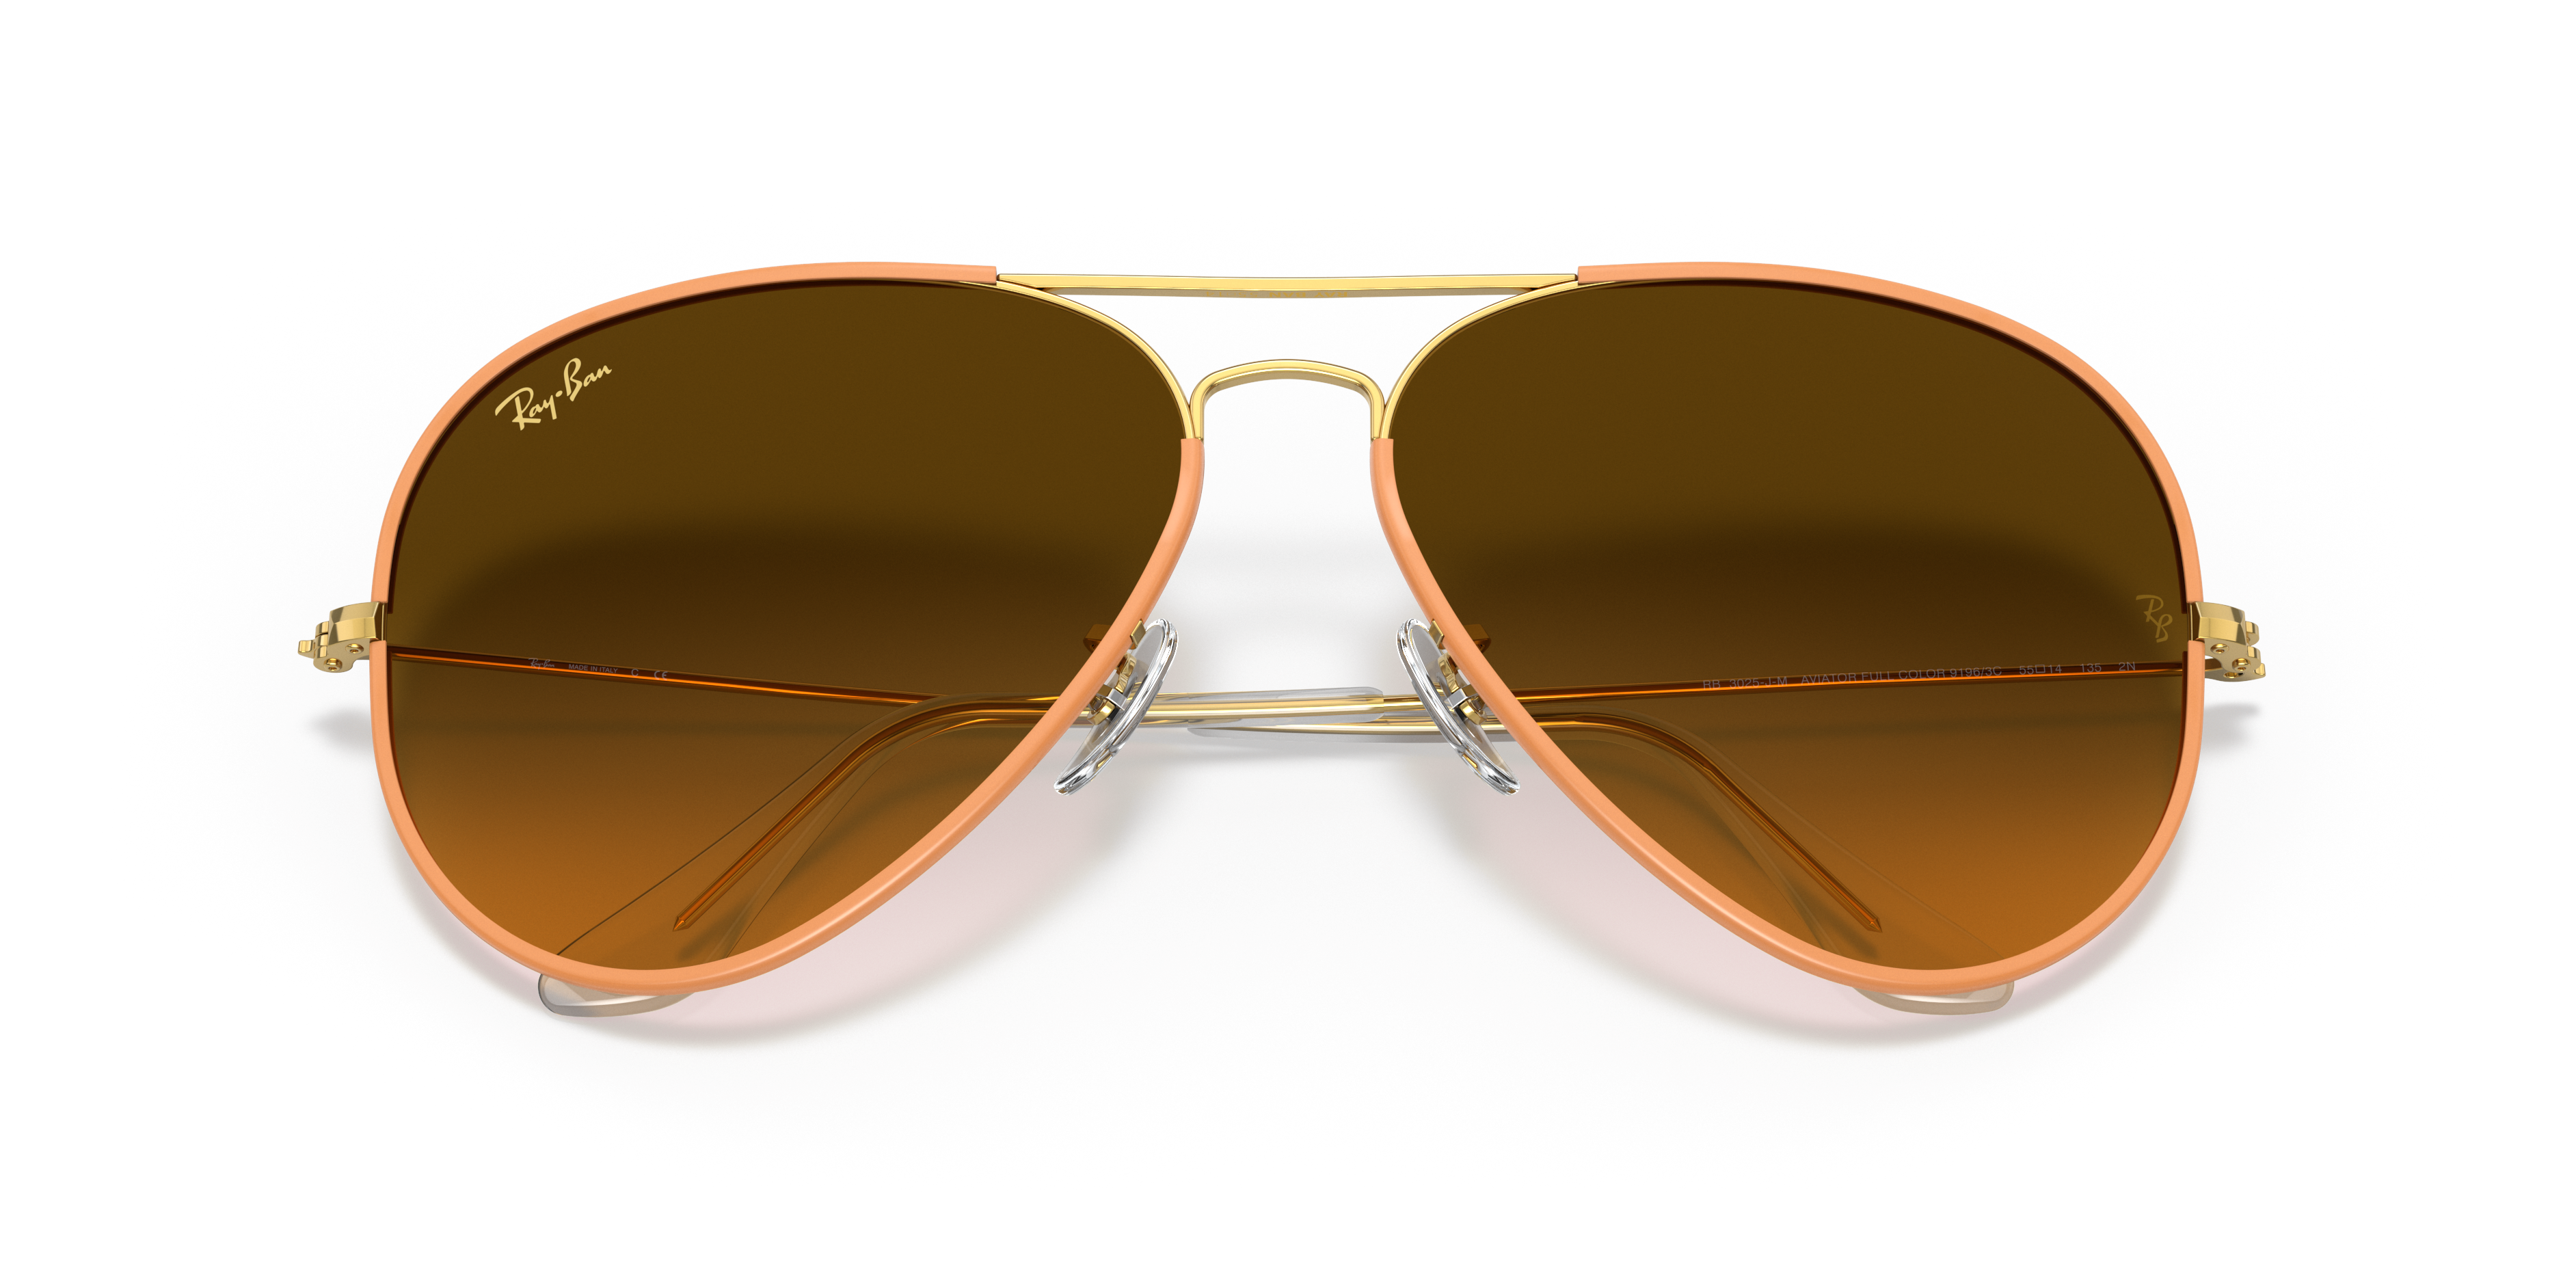 Ray-Ban Aviator Full Color Legend 